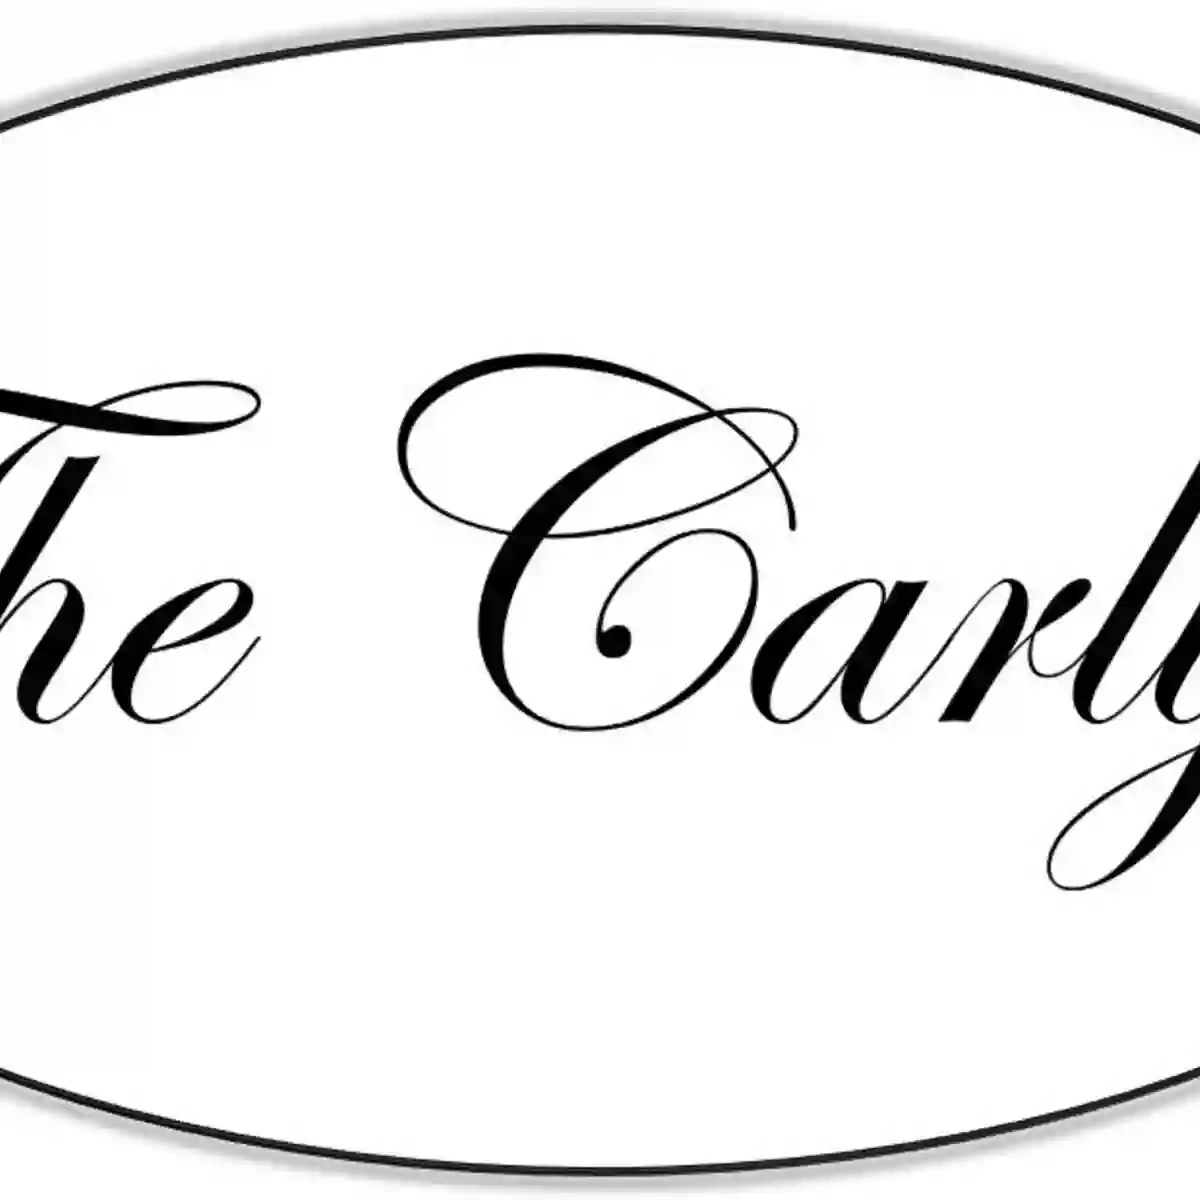 The Carlyle Apartments